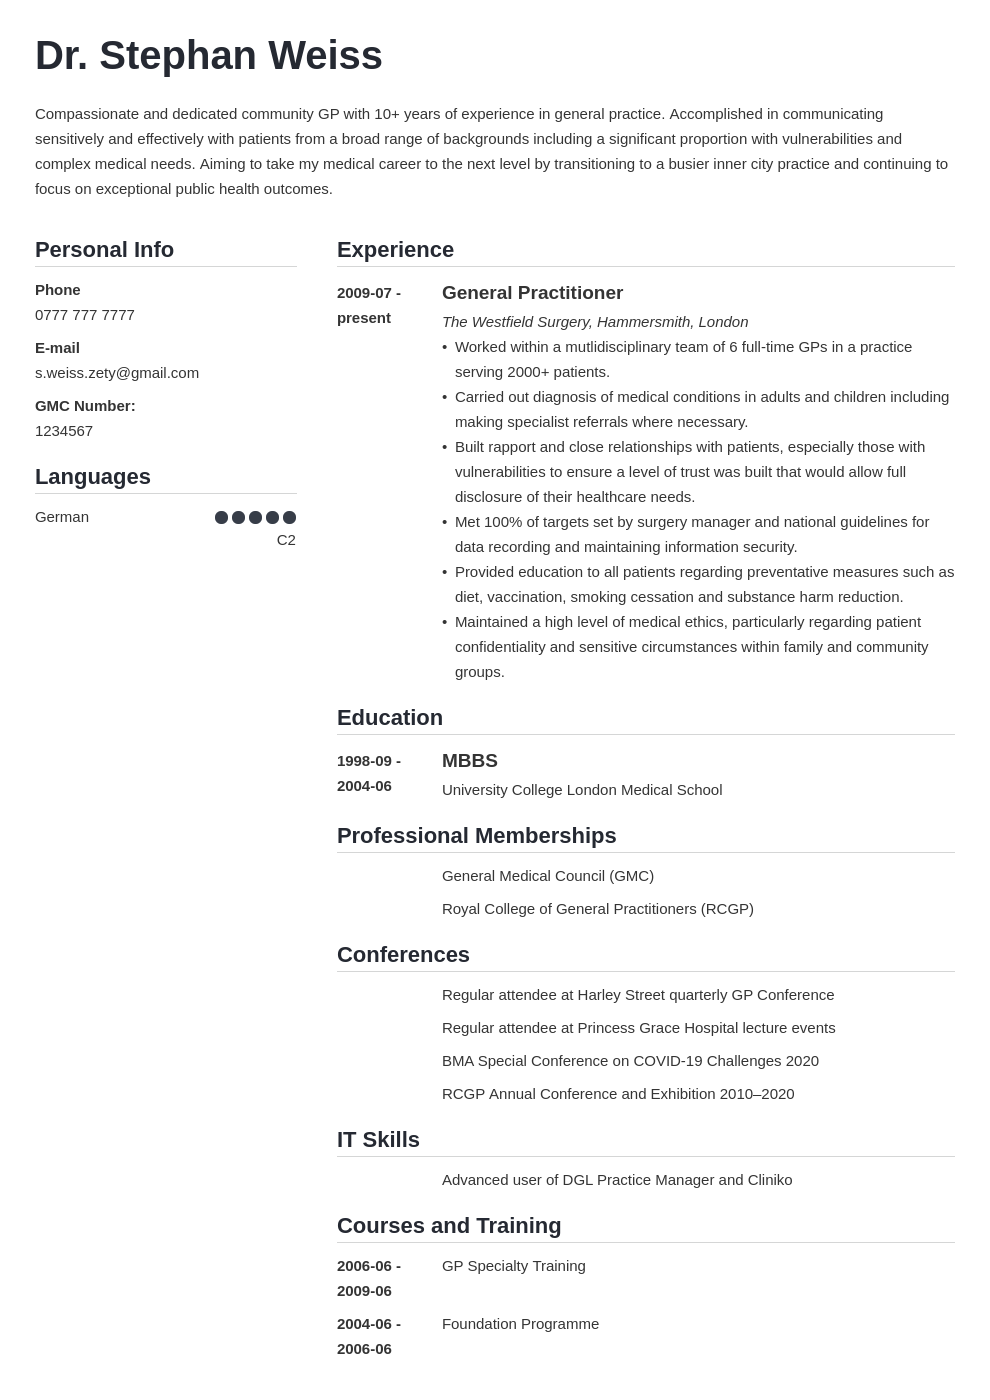 How to Write a Medical CV [Template & 20+ Tips]